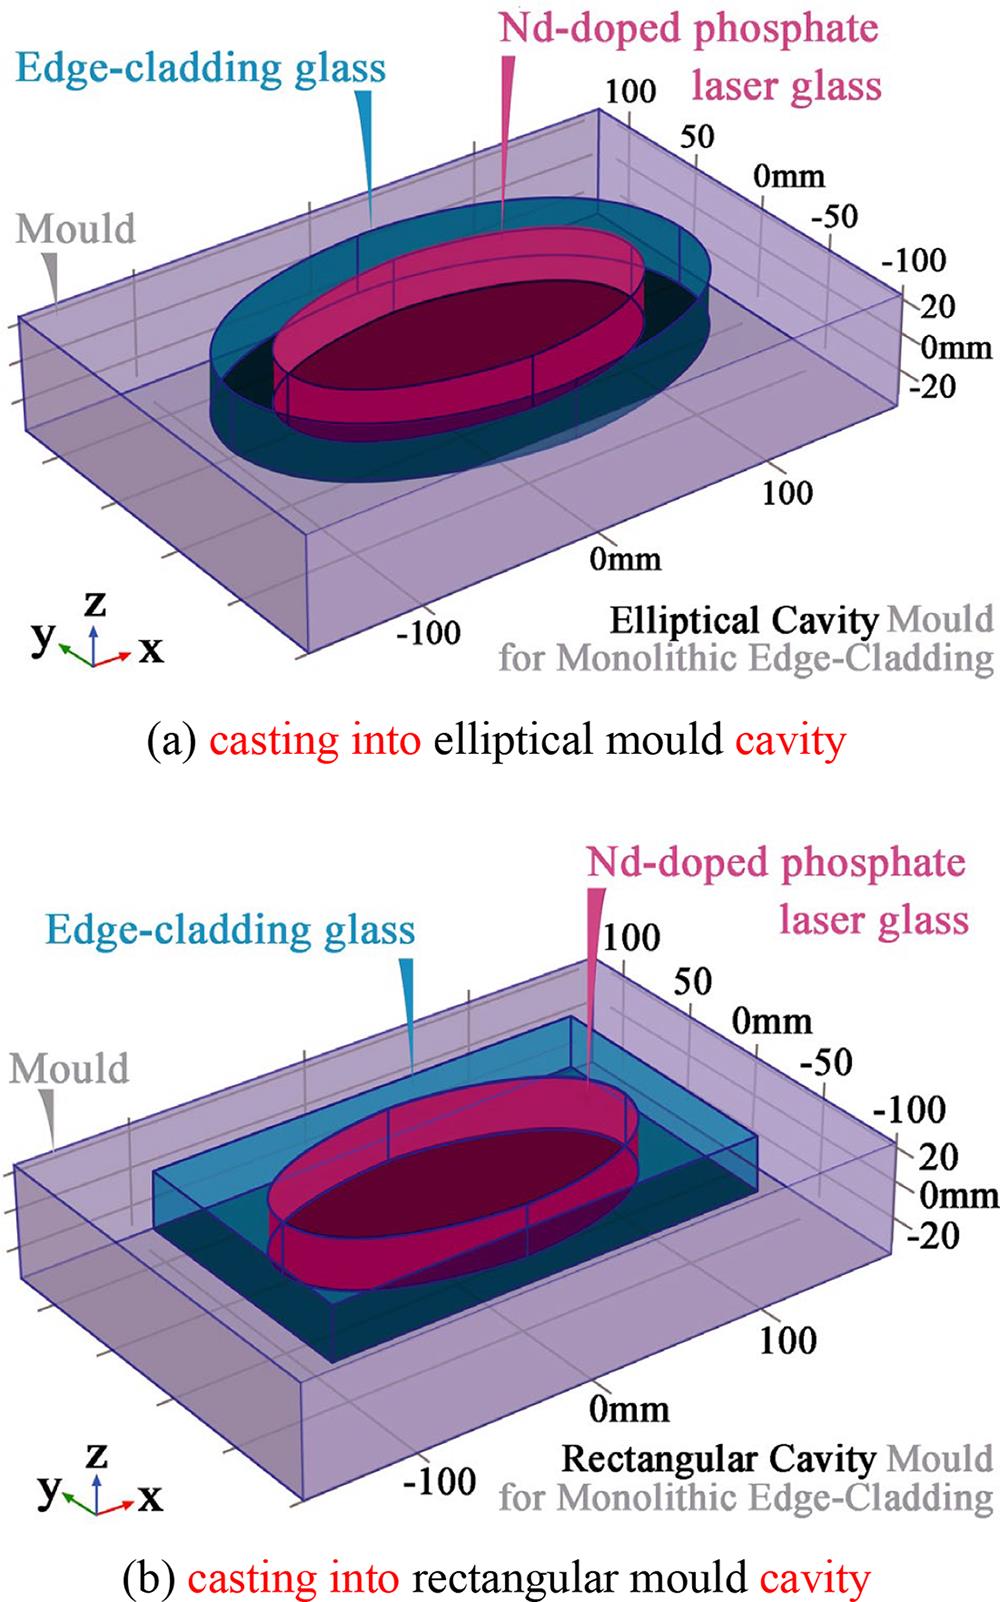 Monolithic edge-cladding process by using (a) an elliptical cavity mould or (b) rectangular cavity mould, both for the same elliptical disks of N31-type Nd-doped laser glass, respectively installed in the elliptical or rectangular mould cavity.